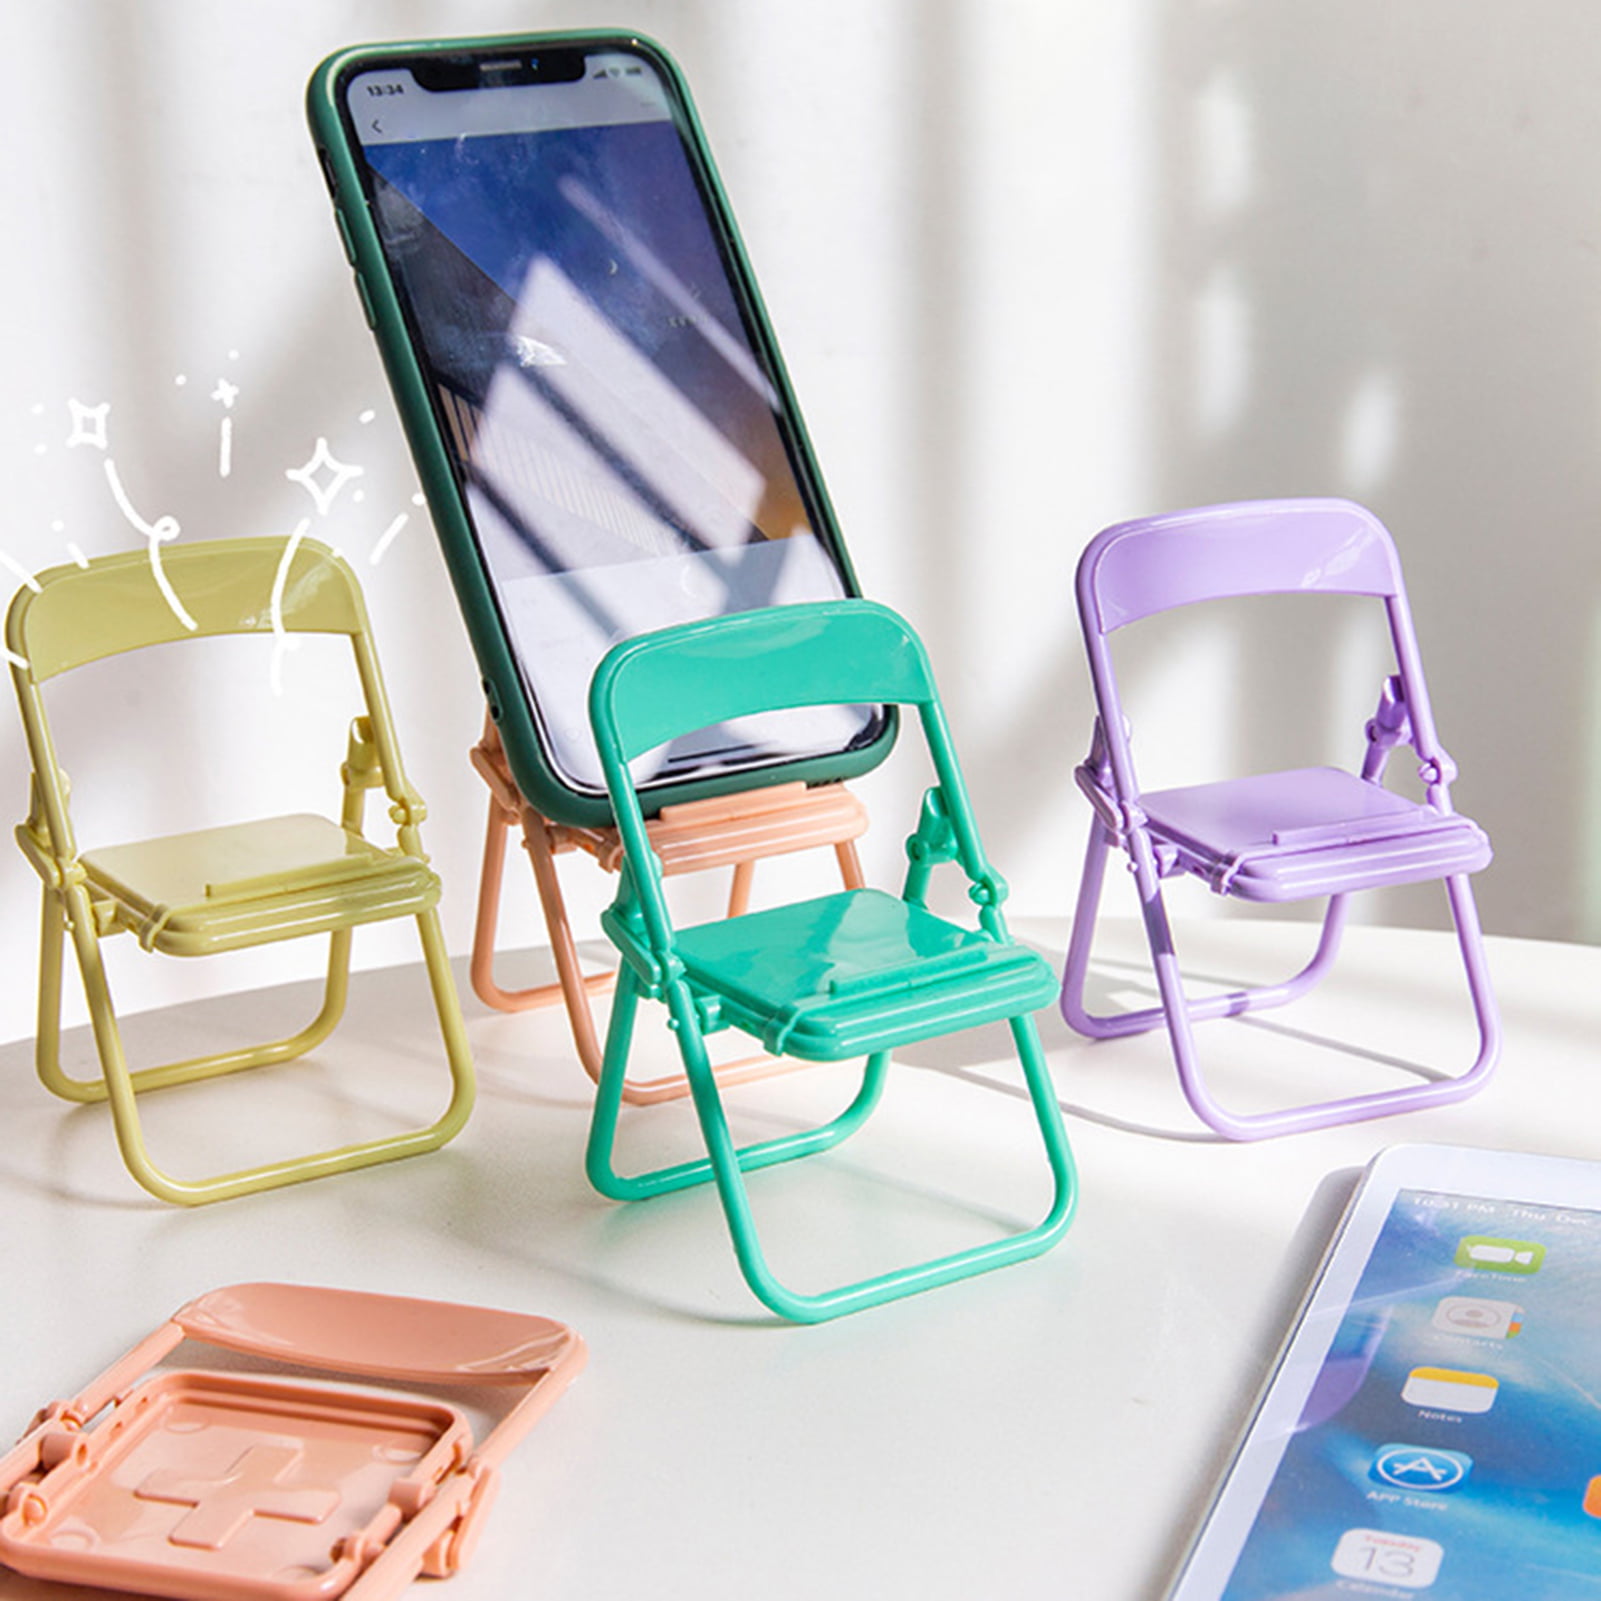 Cute Mini Chair Phone Holder, Card Display Wooden Stand for Desk,  Multi-Angle Universal Mobile Phone Stand for iPhone Samsung